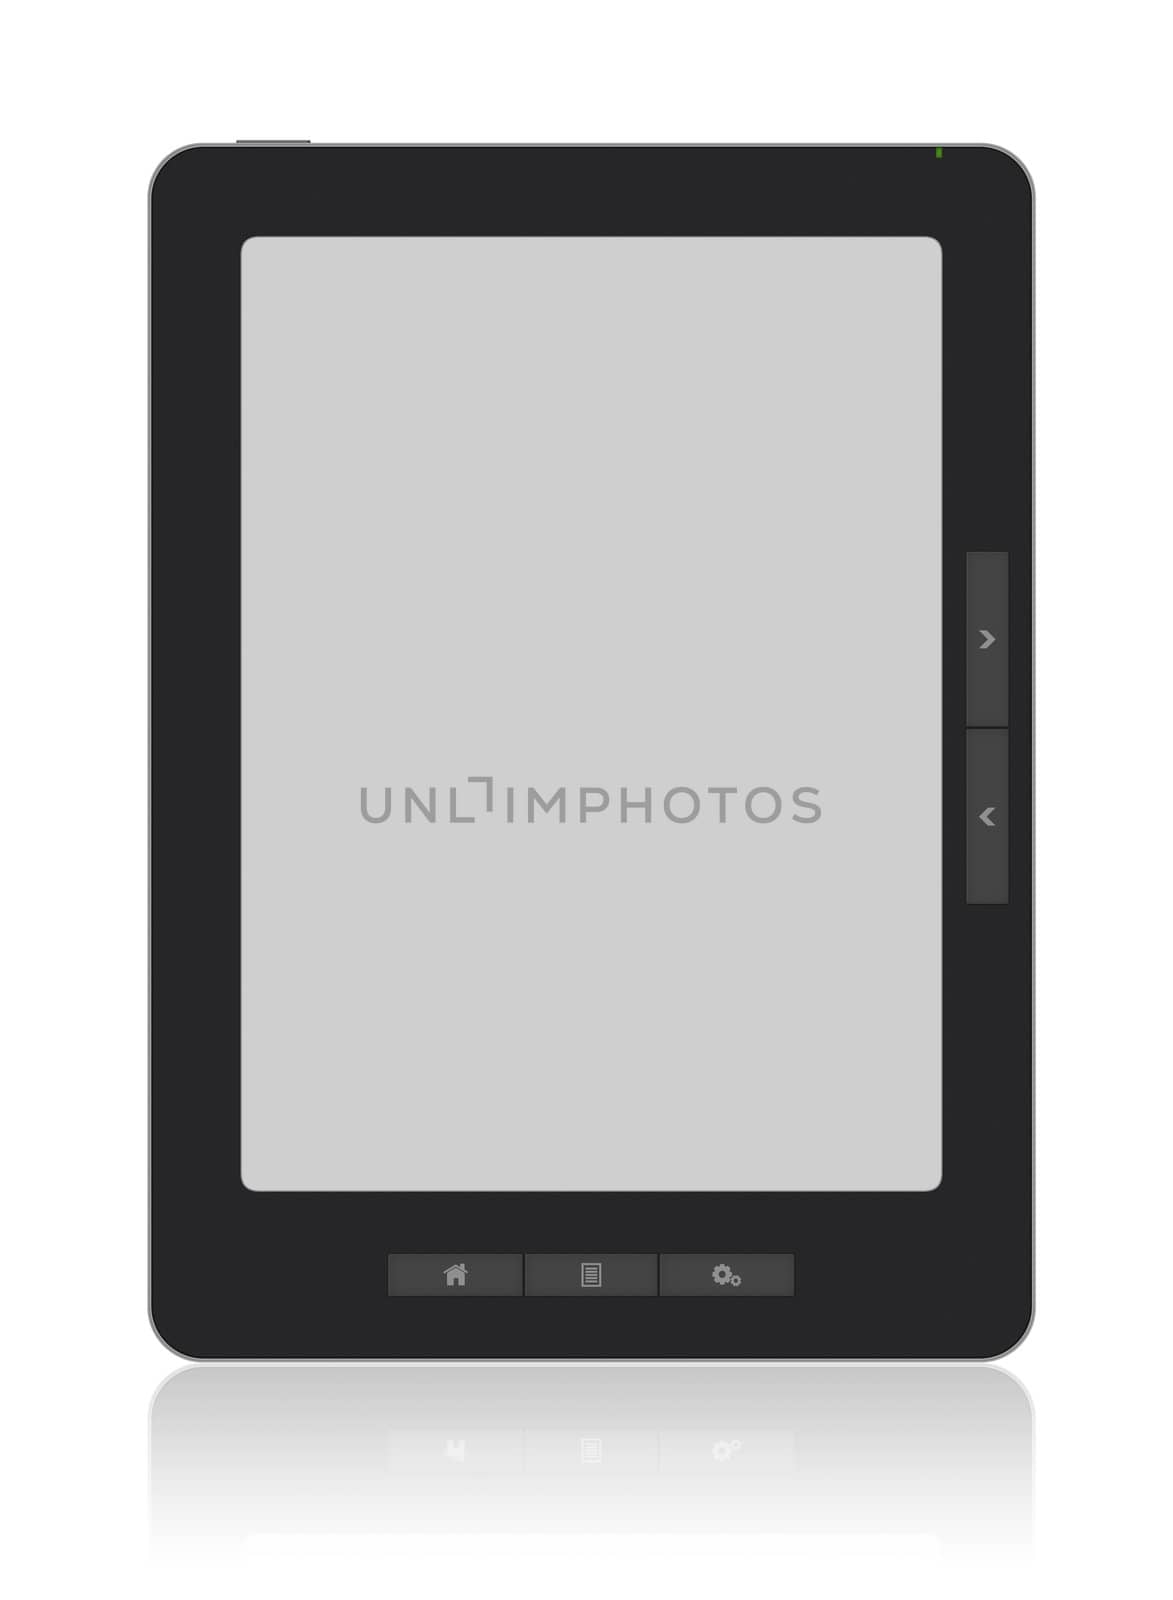 Portable E-Book Reader with Clipping path by bloomua